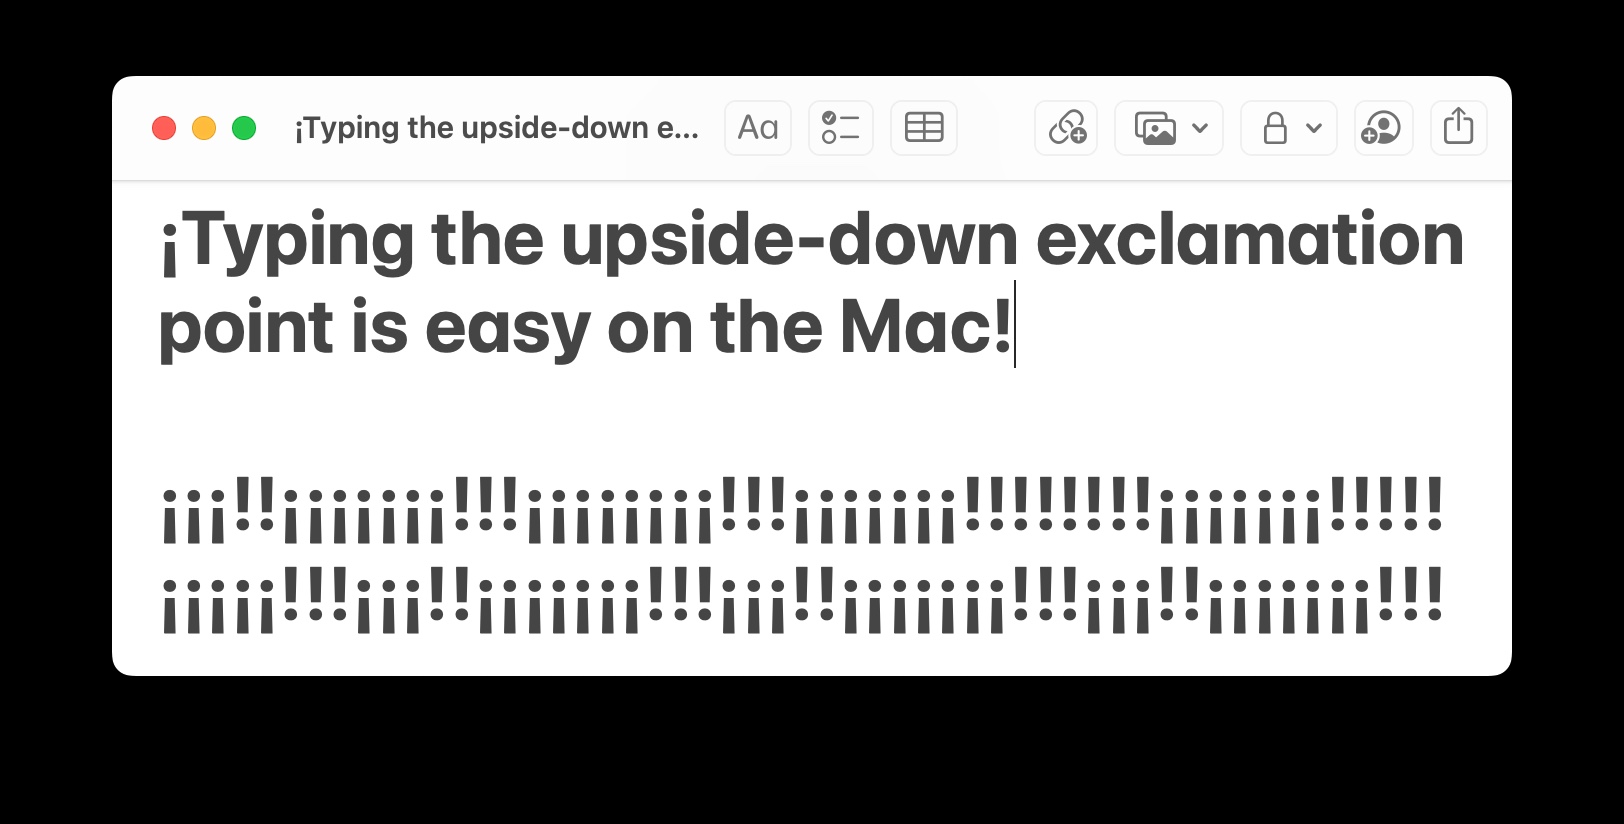 How to Type Upside-Down Exclamation Point on Mac ¡!